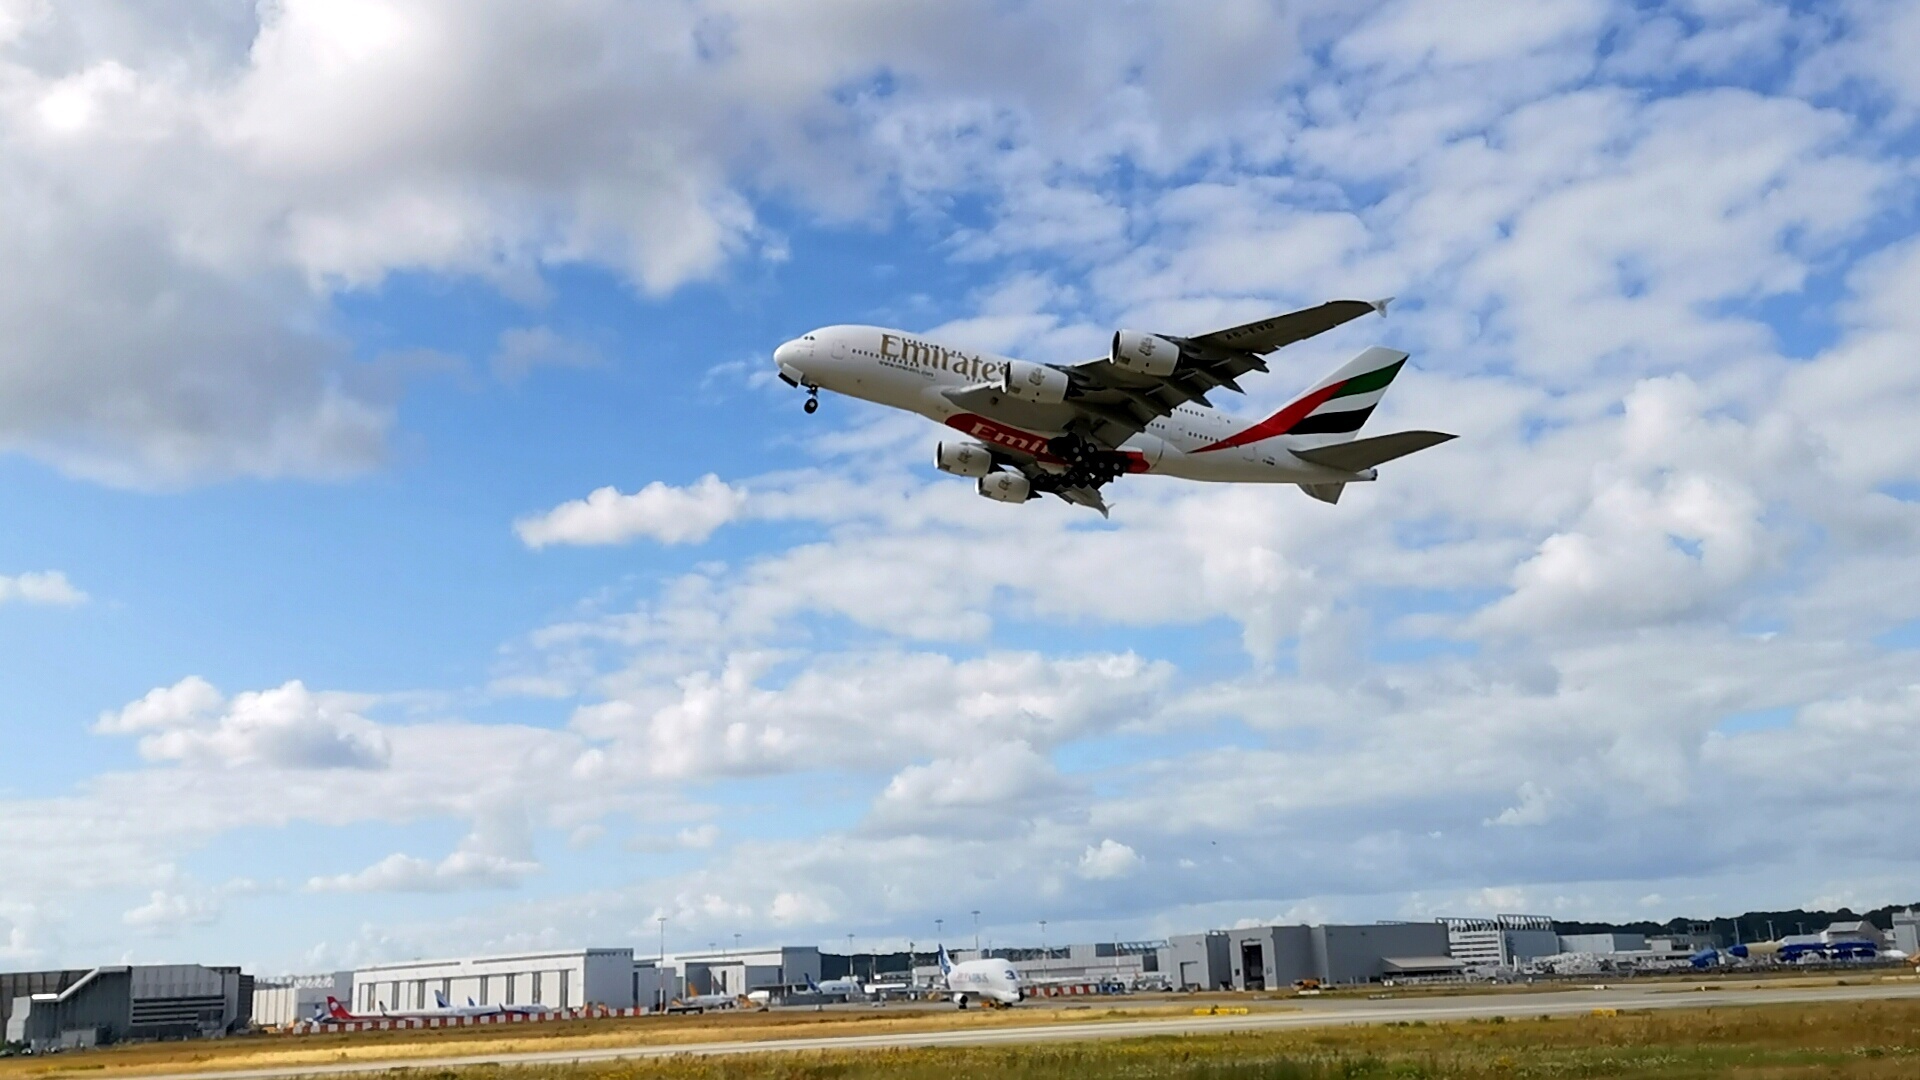 Airbus A380. Photos from the airfield. July 3, 2019 - My, Hamburg, Rammstein Deutschland, Germany, Aviation, Airbus, Airbus A380, Takeoff, Airplane, Video, Longpost